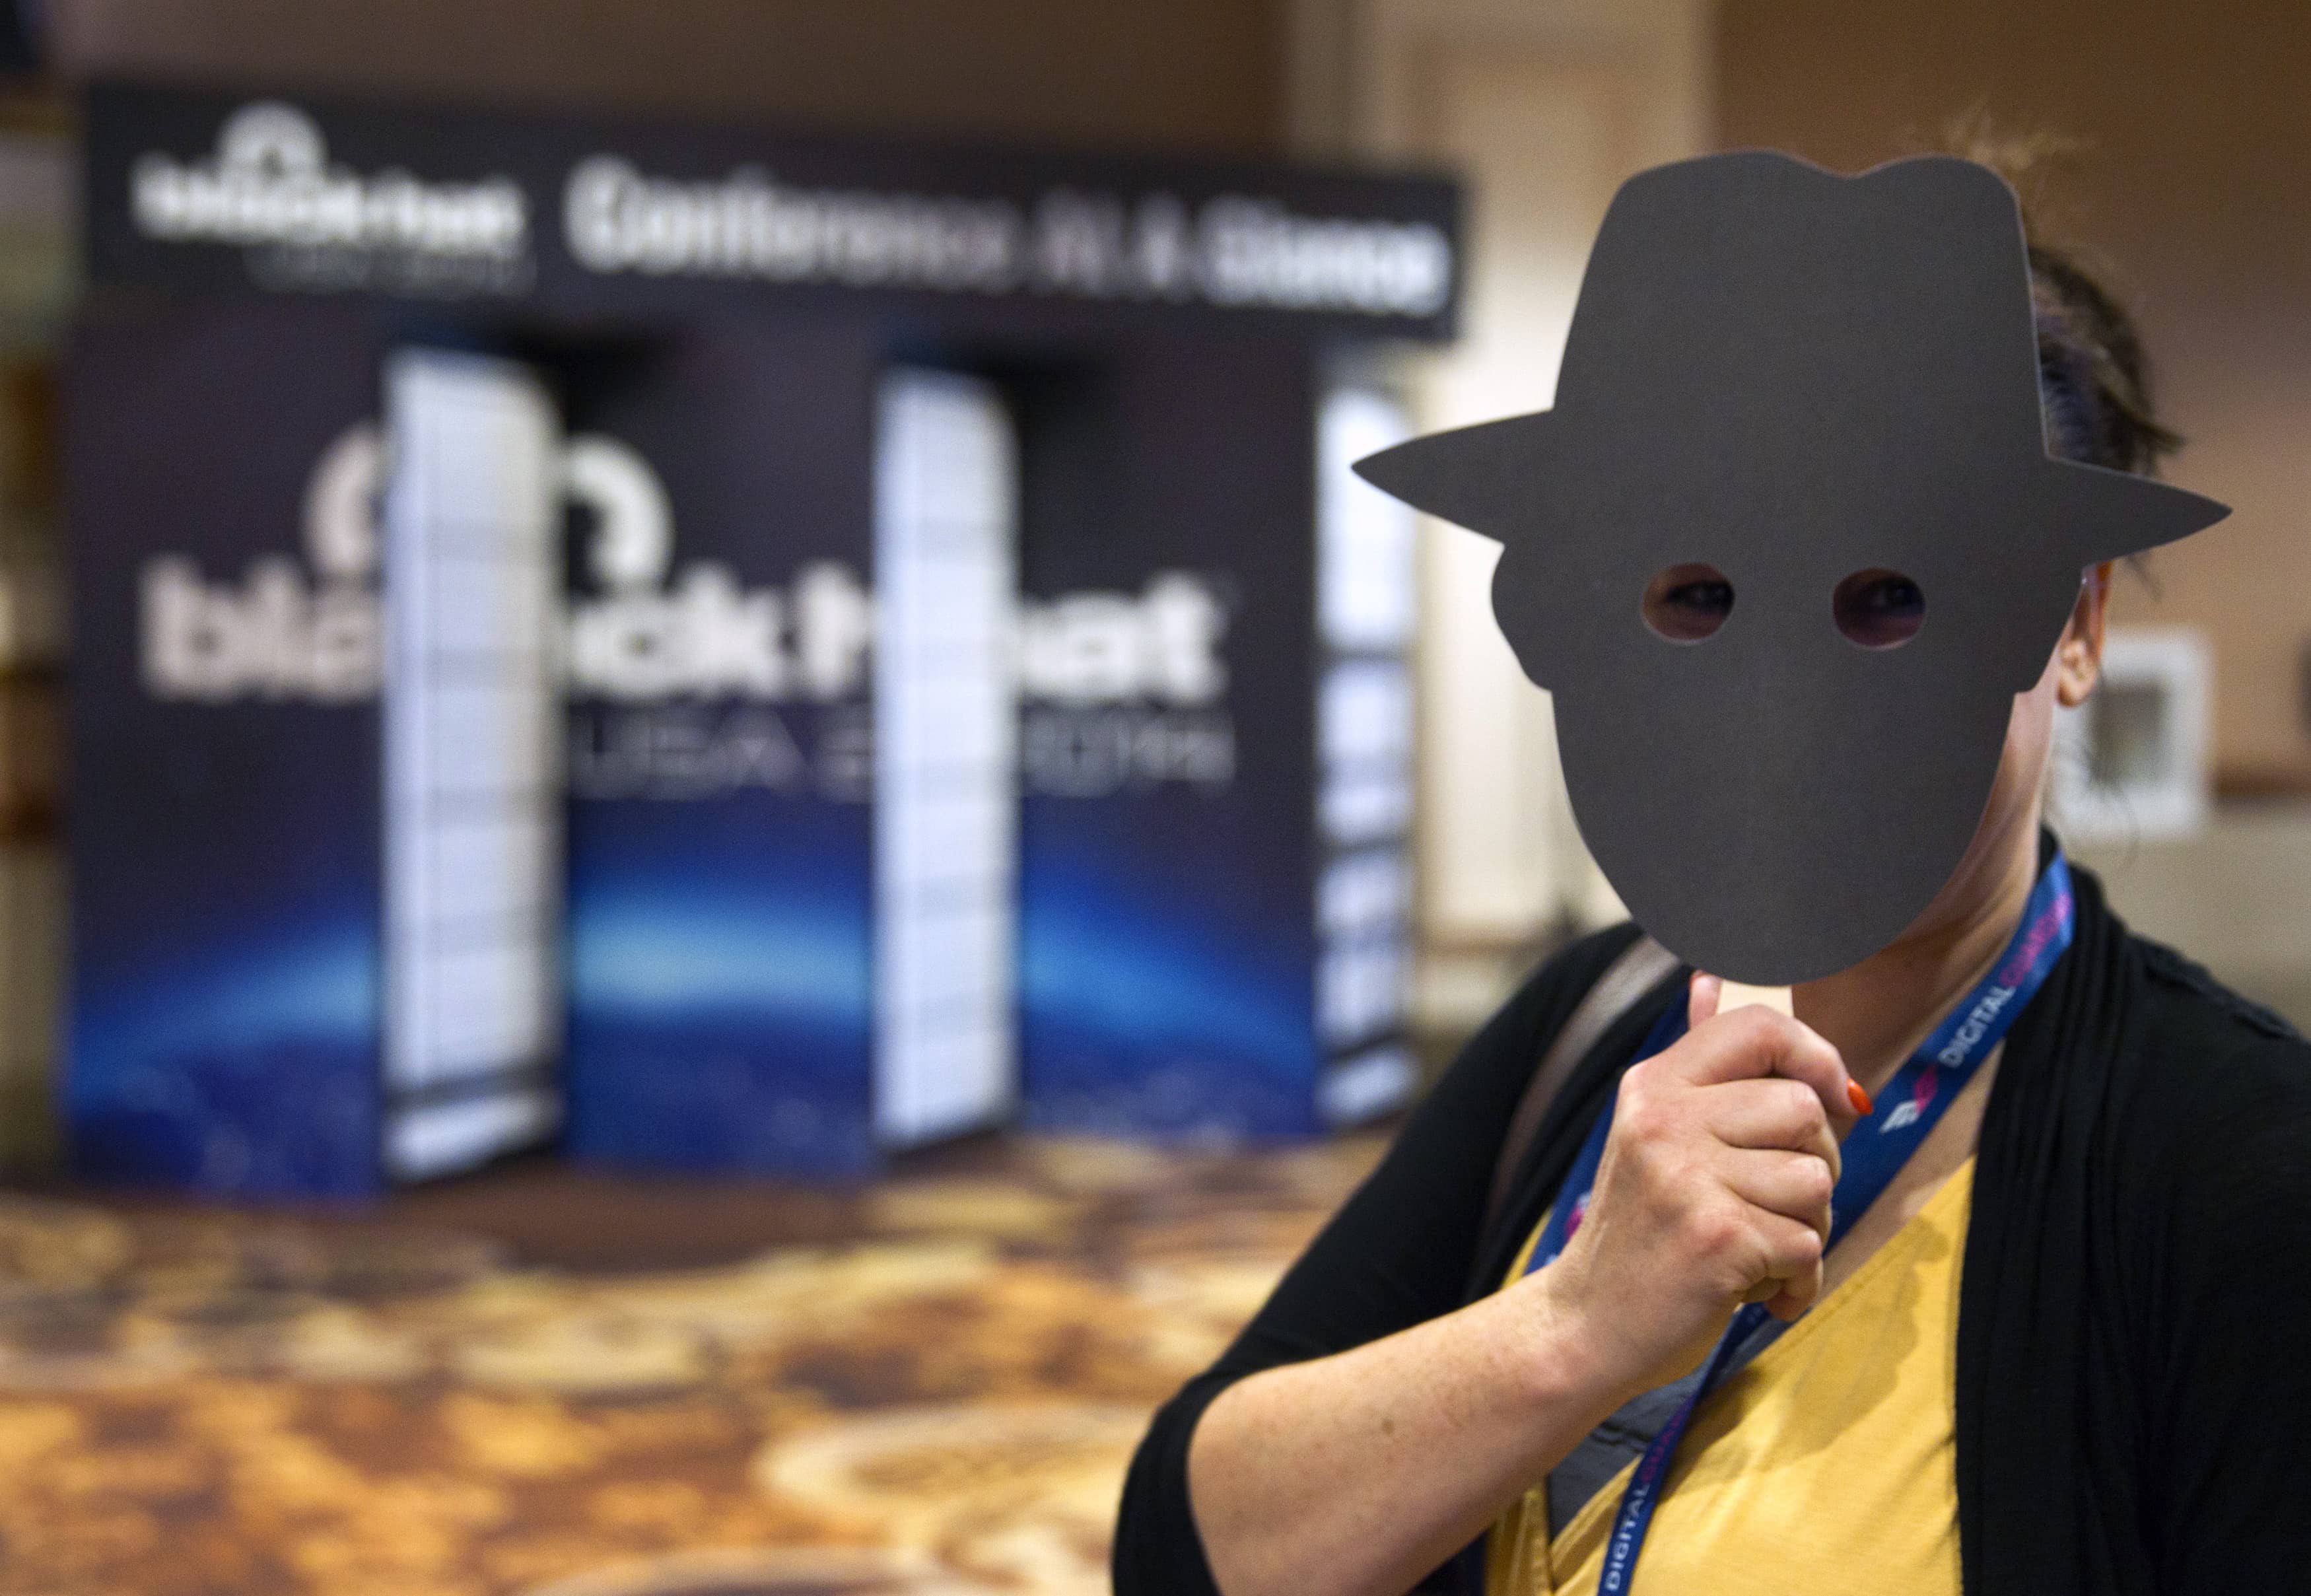 A mask that is part of a privacy awareness campaign is worn by a participant at a hacker conference in Las Vegas, 5 August 2014, REUTERS/Steve Marcus